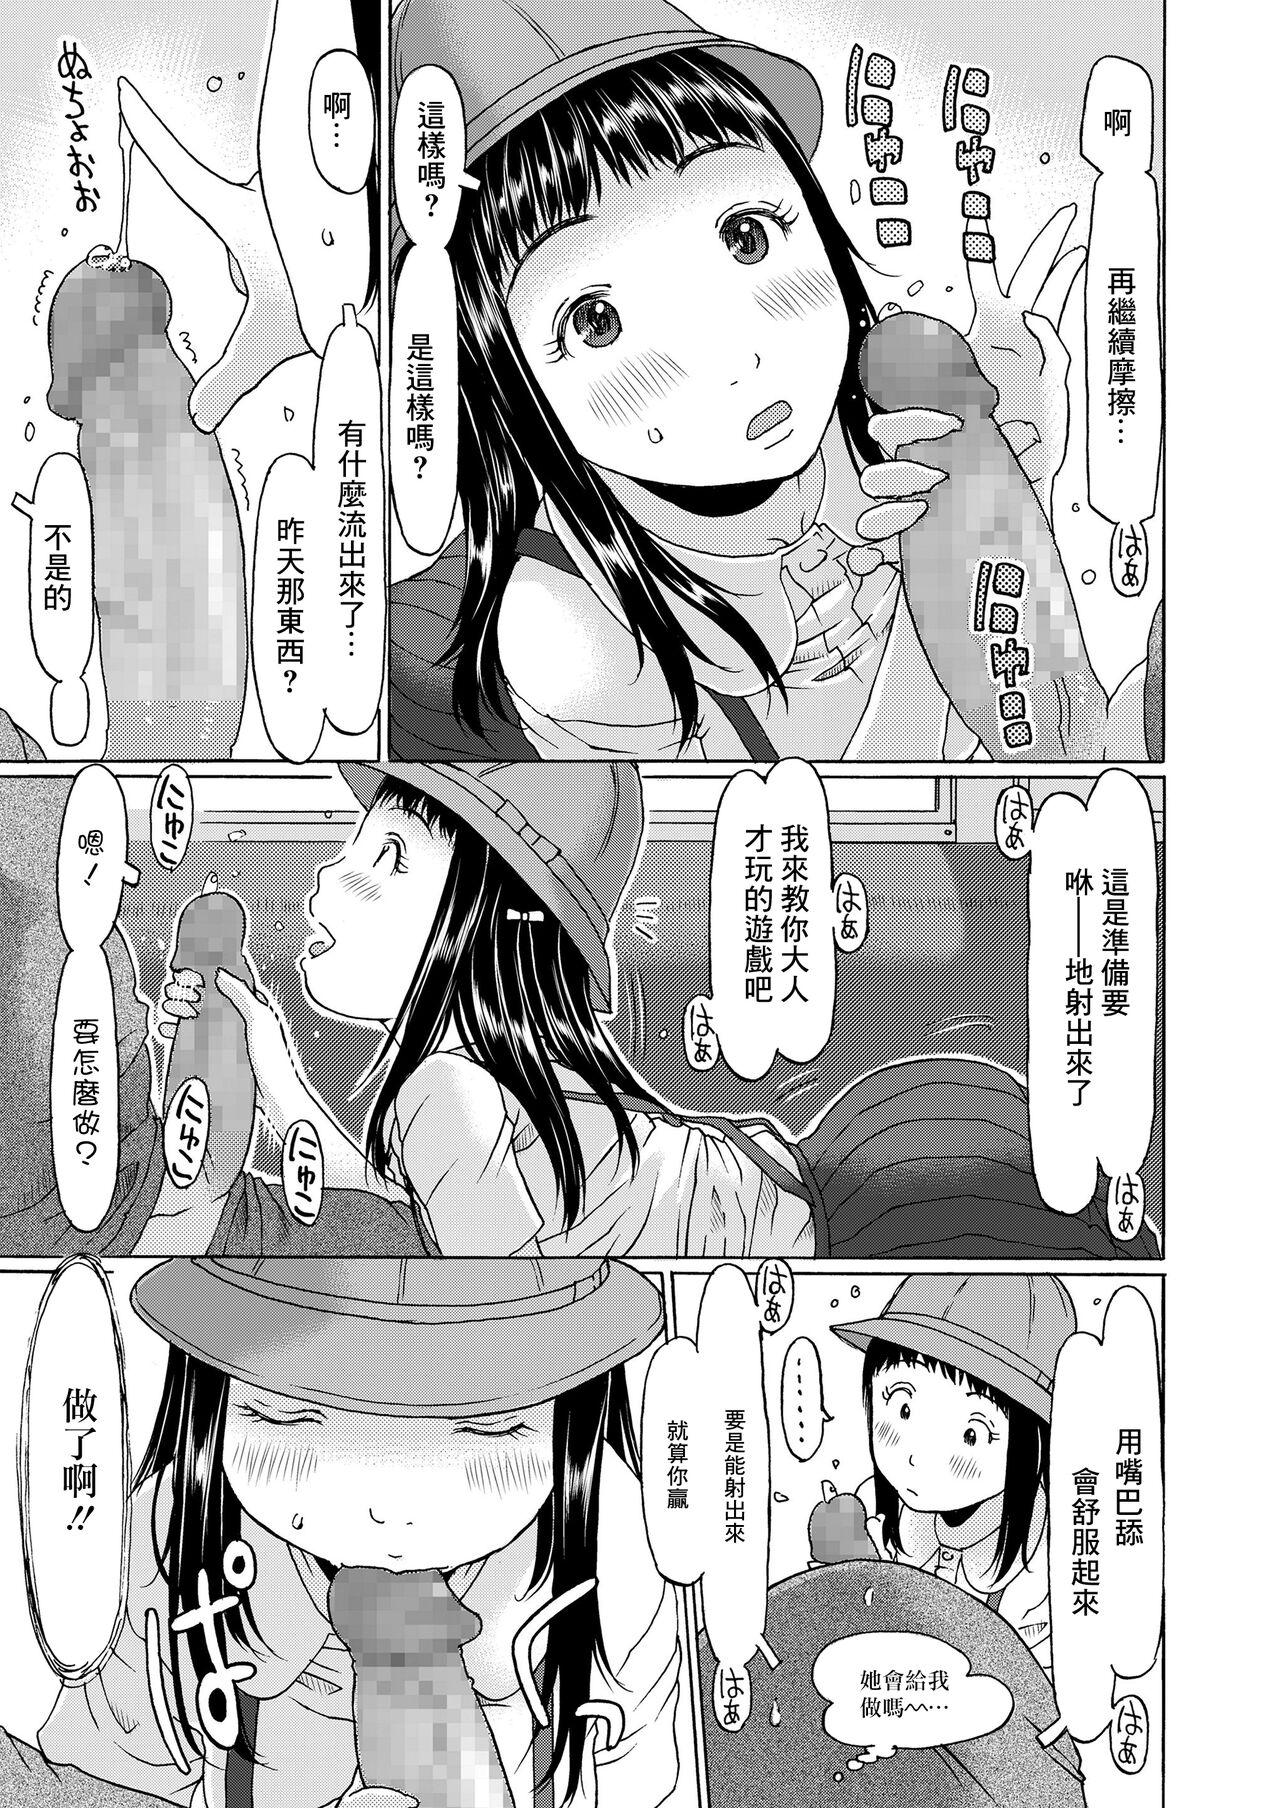 Oral Porn 電車に乗ったら発射です Hymen - Page 7